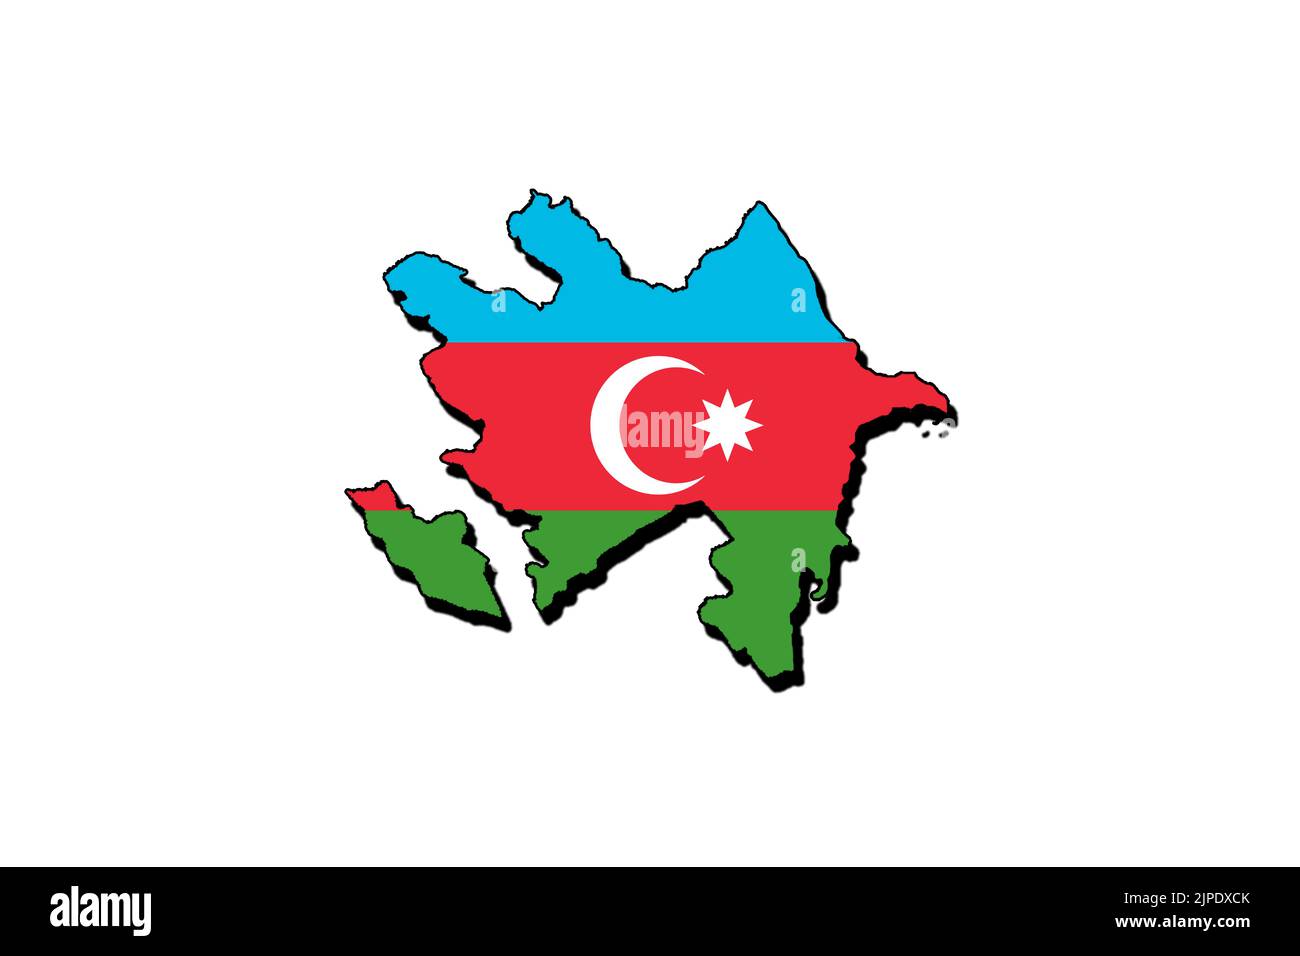 Silhouette of the map of Azerbaijan with its flag Stock Photo